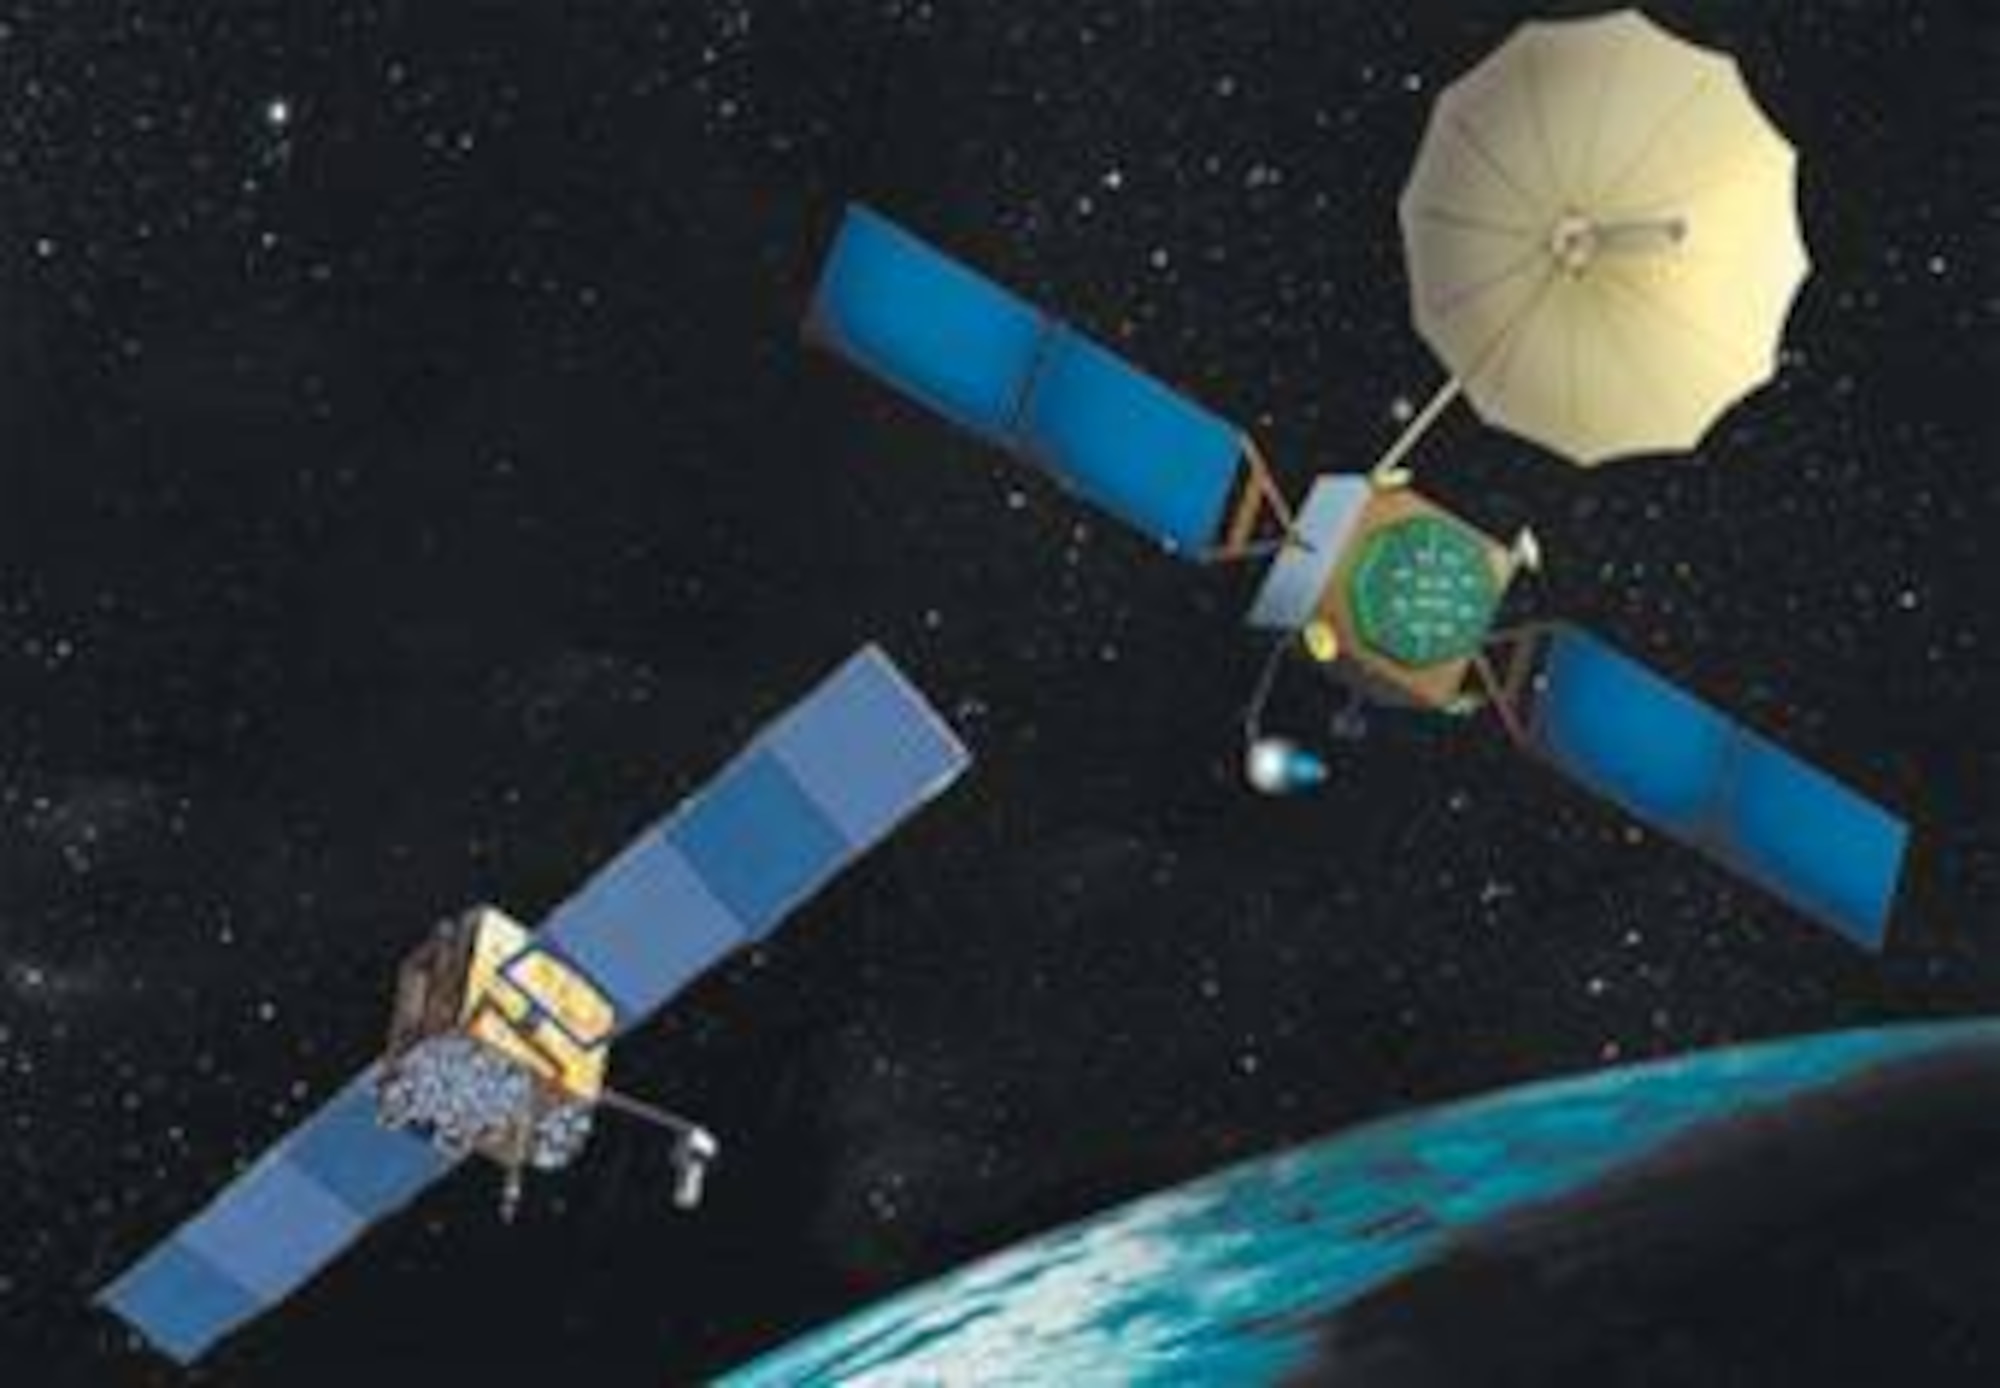 Global Positioning System satellites stationed in key positons in outer space provide vital service to both the military and civilian users.